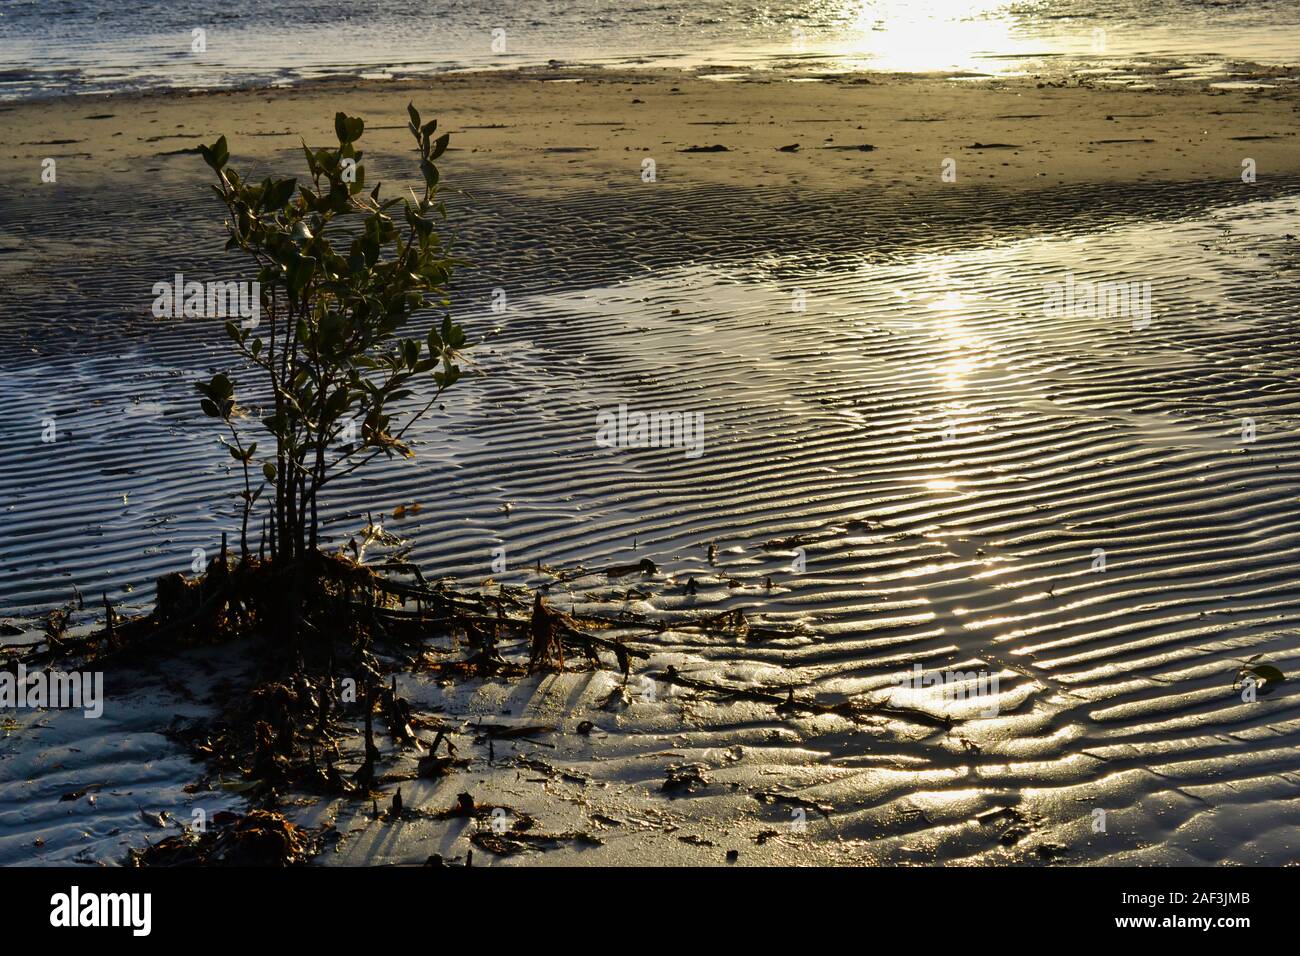 A young Mangrove standing in the shallows at low tide. Banksia Beach, Queensland, Australia Stock Photo